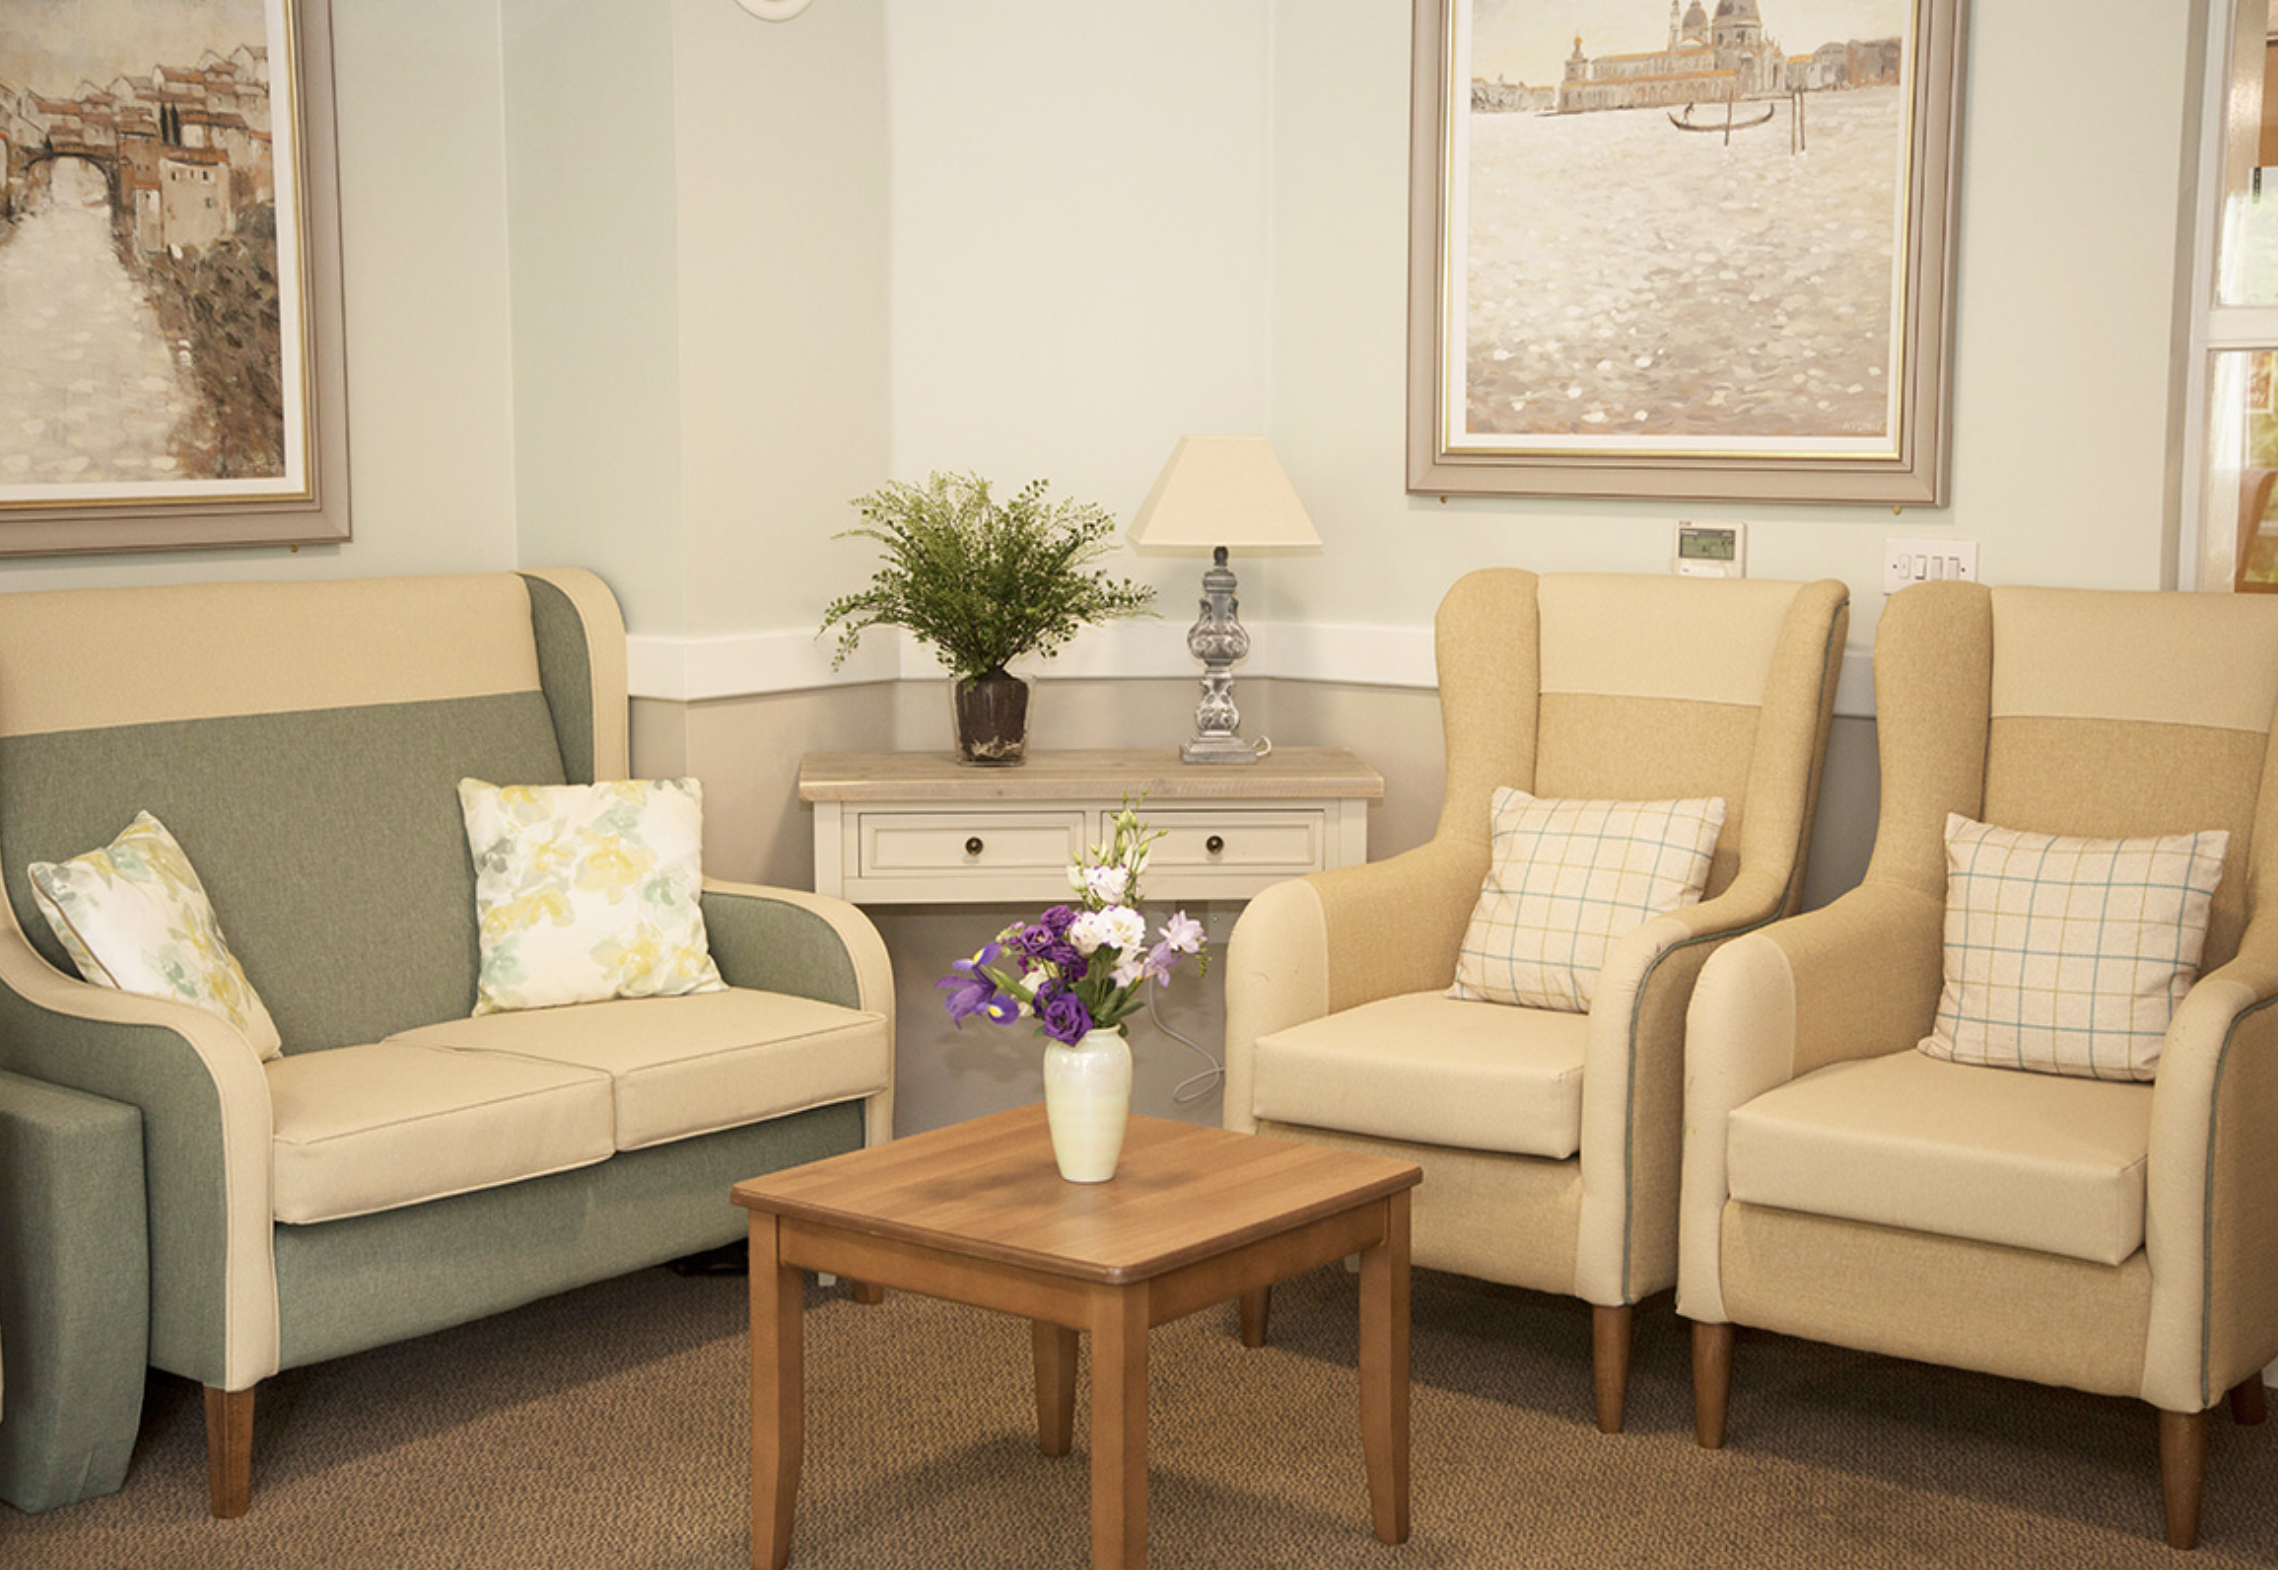 Lounge of Hampden Hall care home in Aylesbury, Buckinghamshire